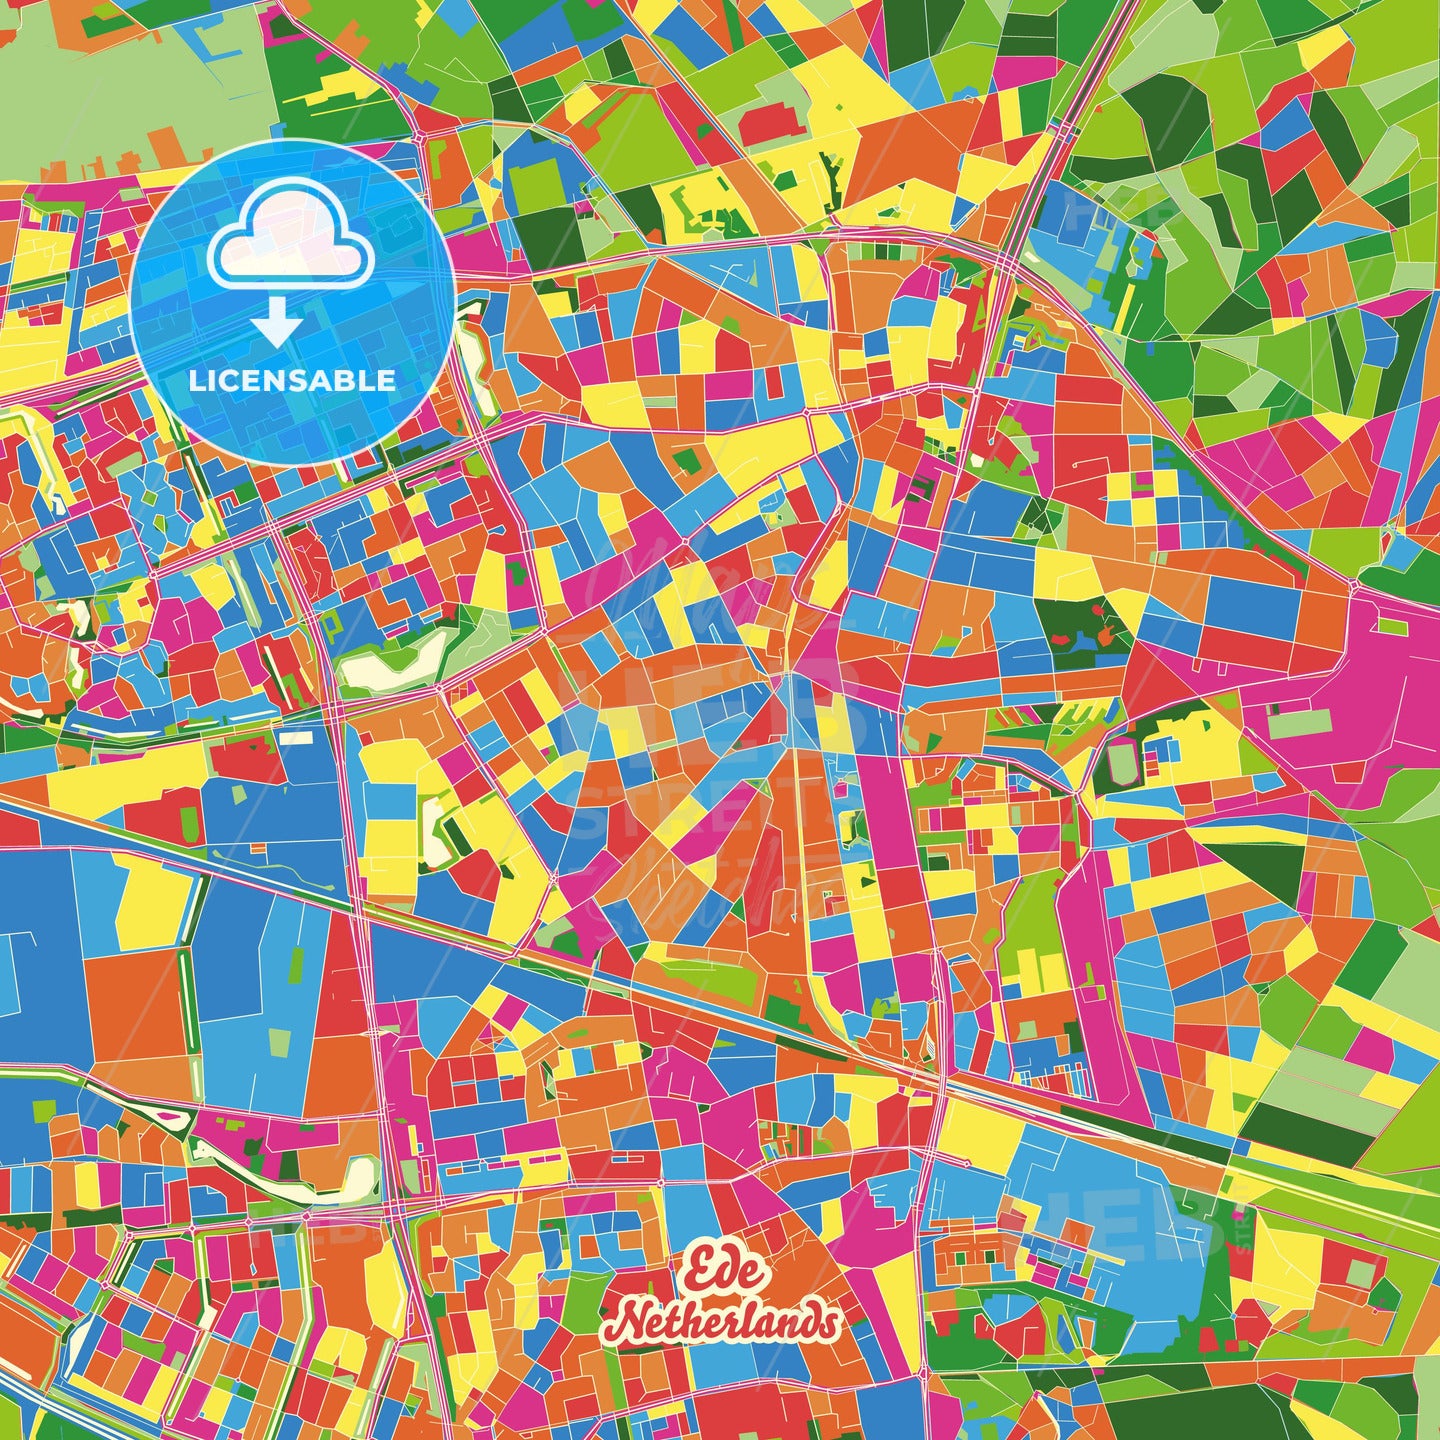 Ede, Netherlands Crazy Colorful Street Map Poster Template - HEBSTREITS Sketches